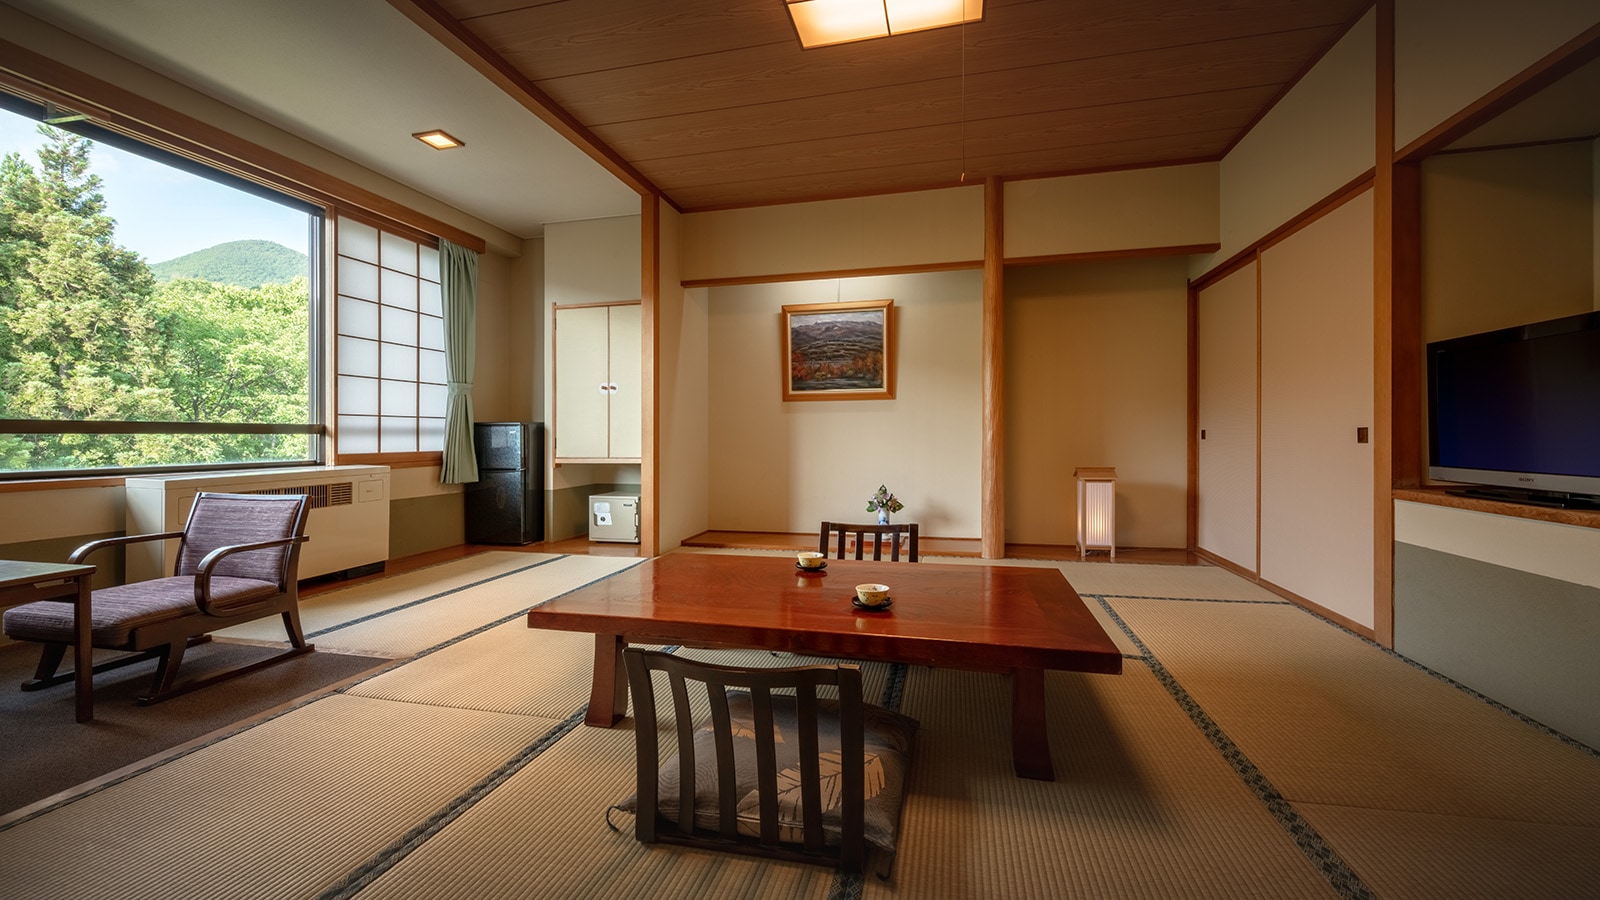 ■ Japanese-style room where you can enjoy the nature of Zao from the window